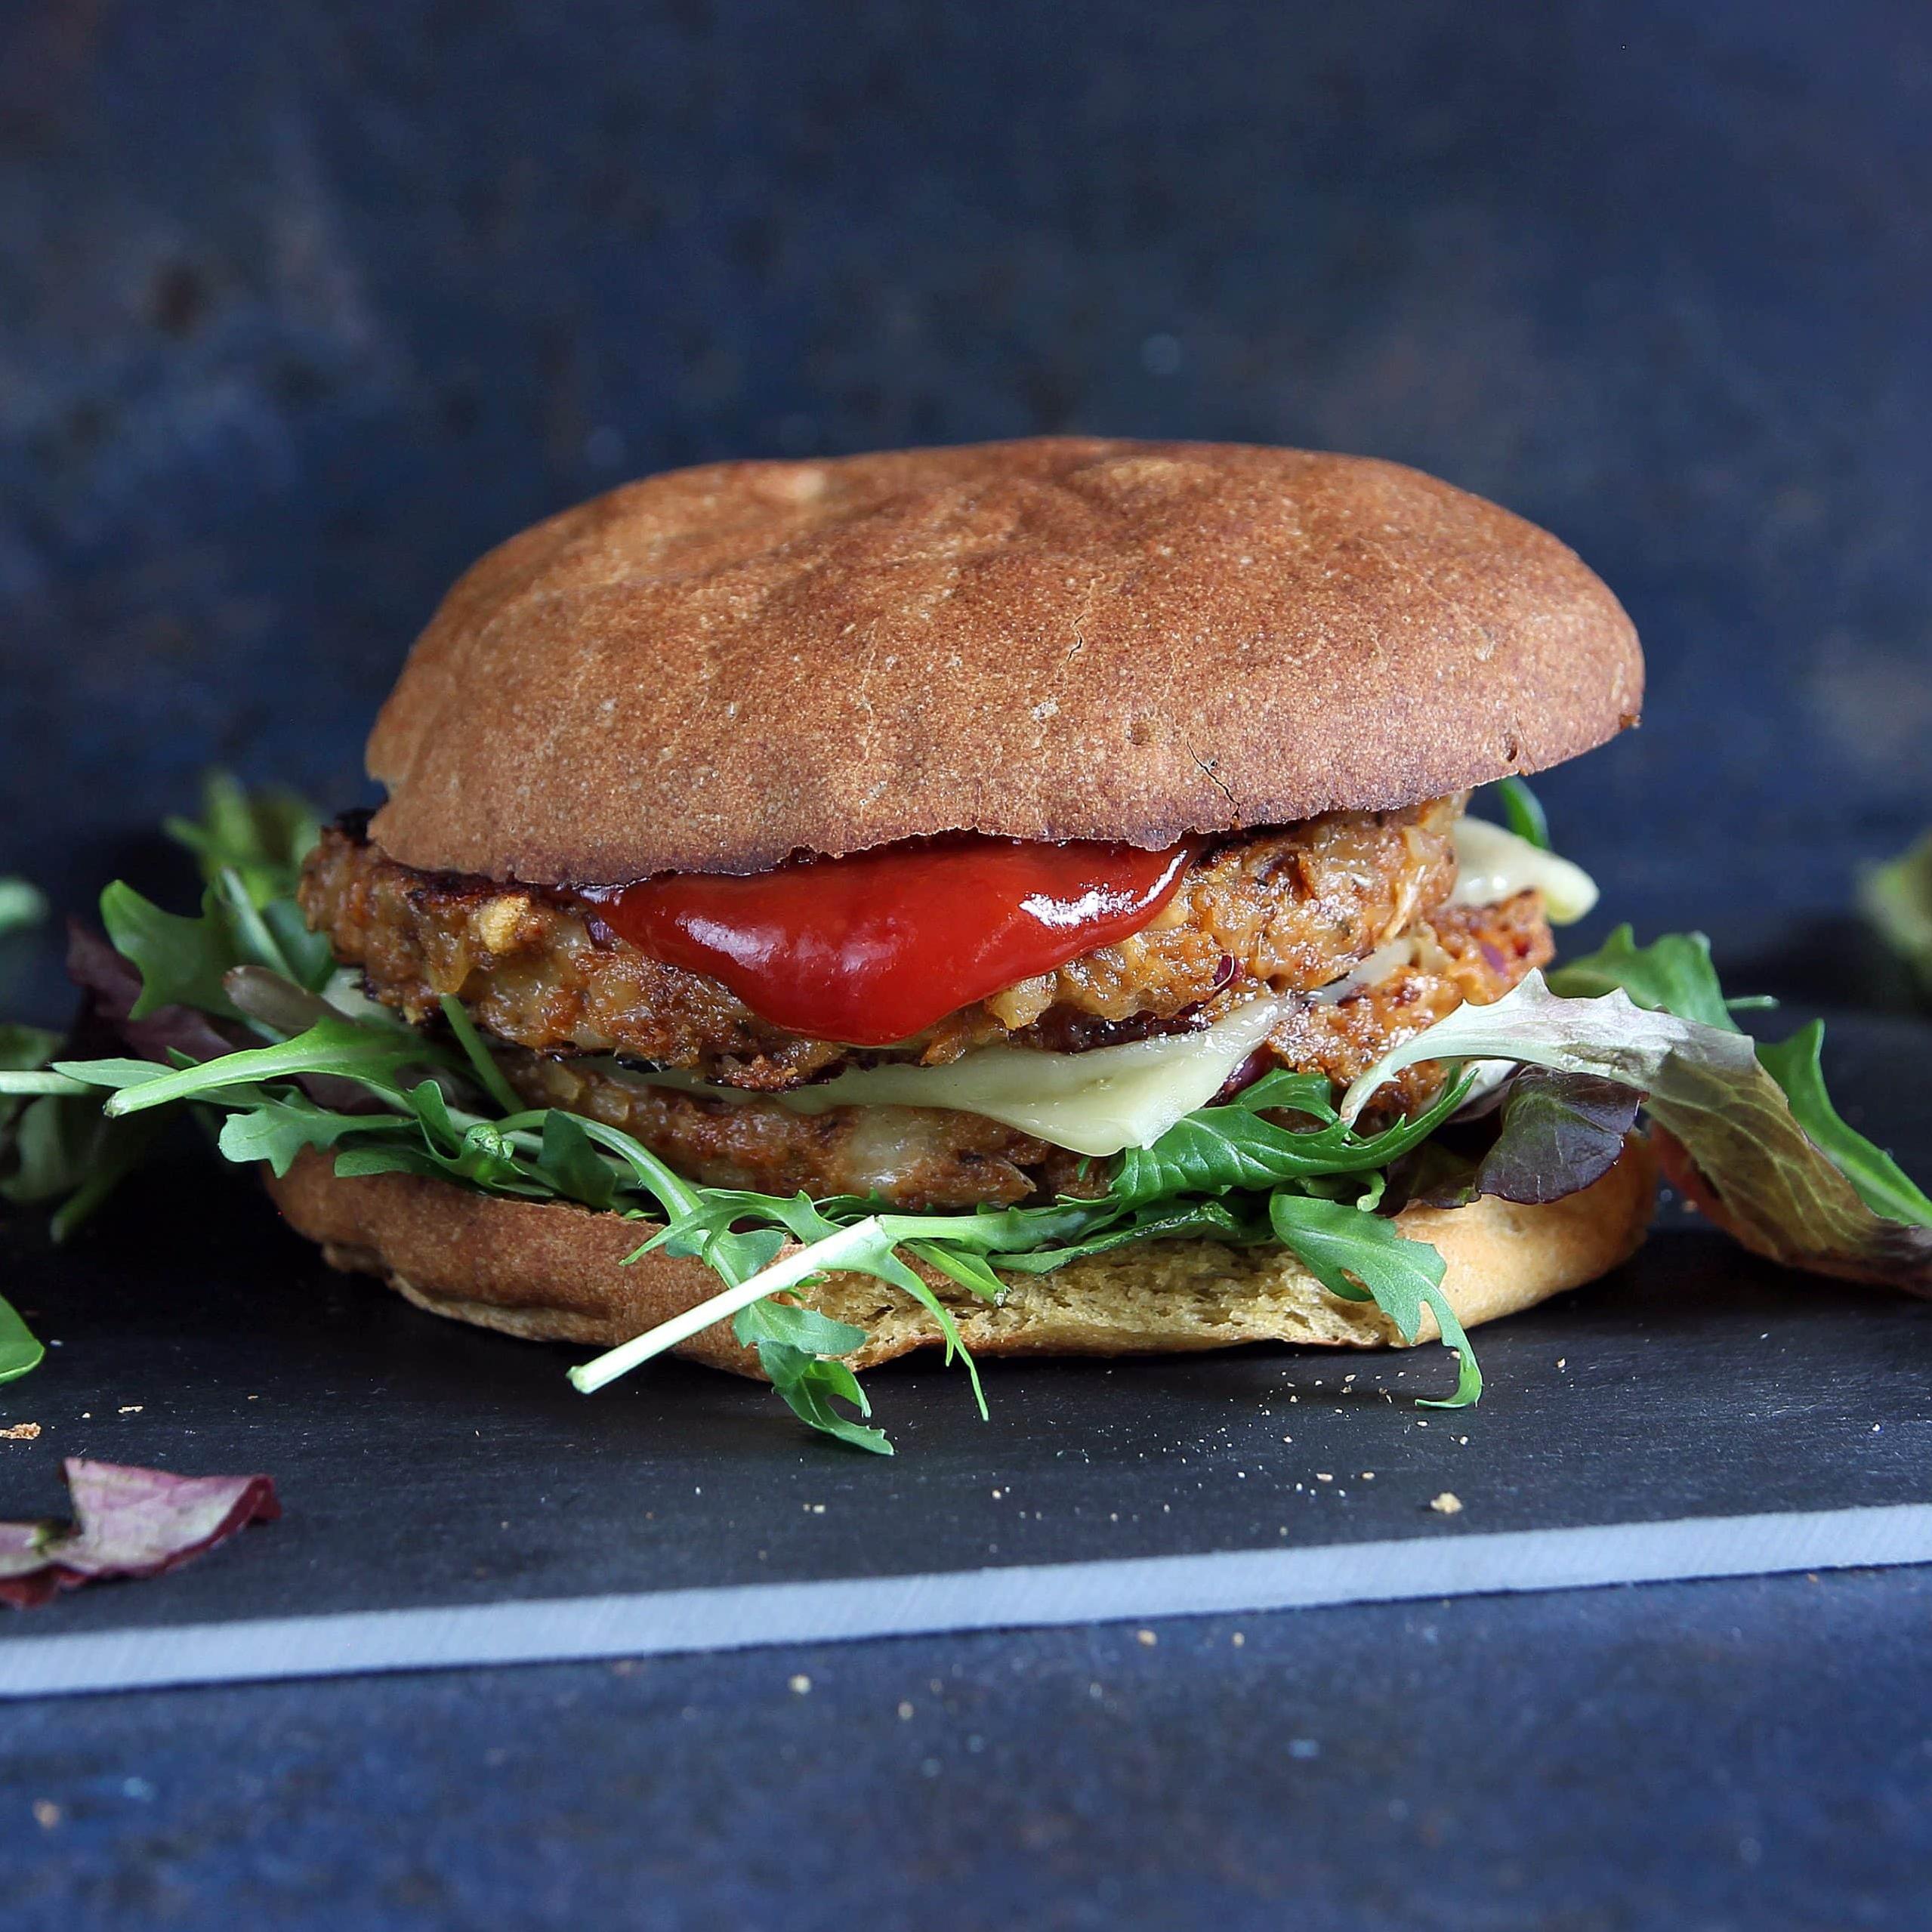  The ultimate in texture and taste, our gluten-free veggie burgers are the perfect main course for any meal.